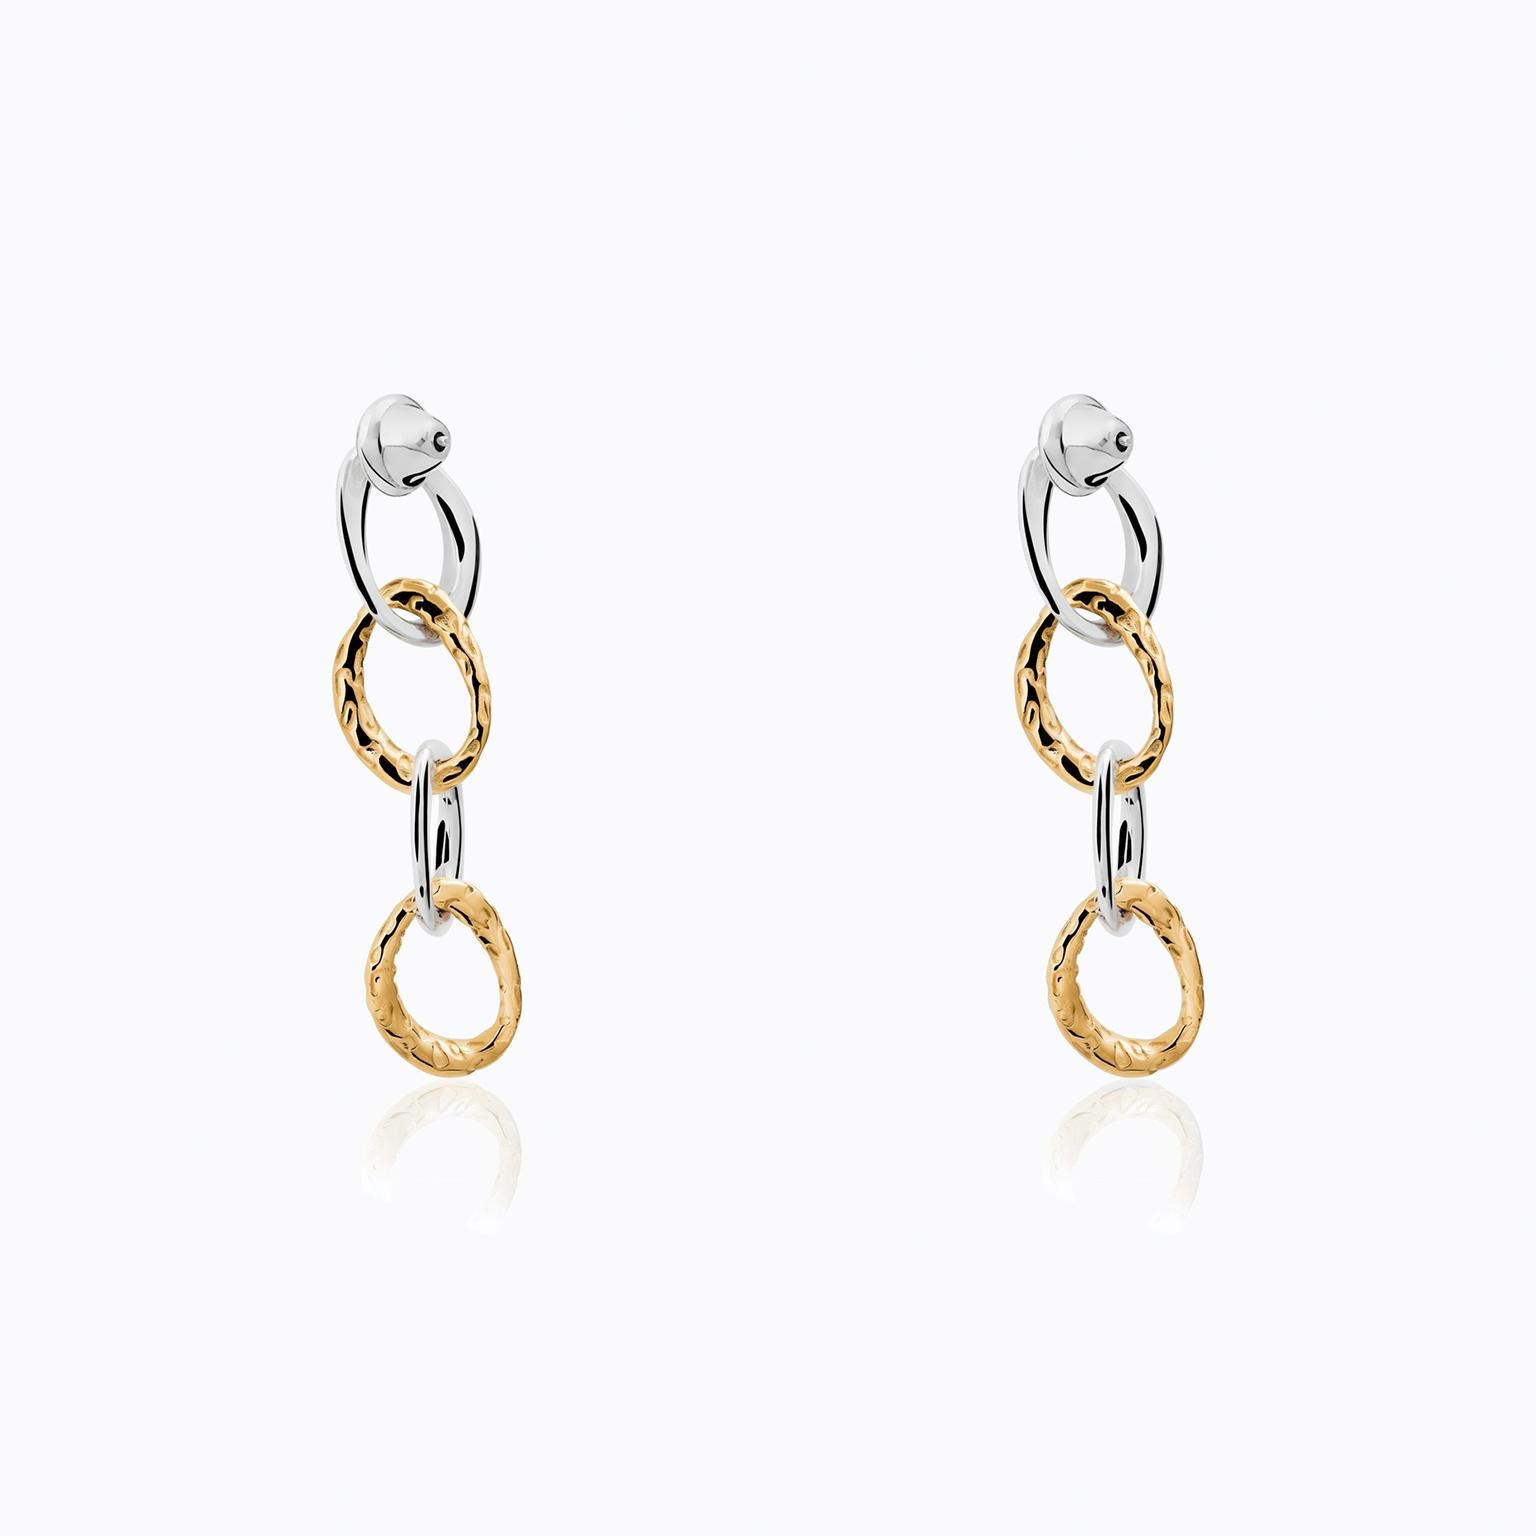 The Long Jaguar Earrings from the Animal´s Collection by TANE are made in silver .925 with 23k Yellow Gold Vermeil, are composed of five interlaced links. The polished silver links are contrasted with the contiguous ones, decorated with the jaguar